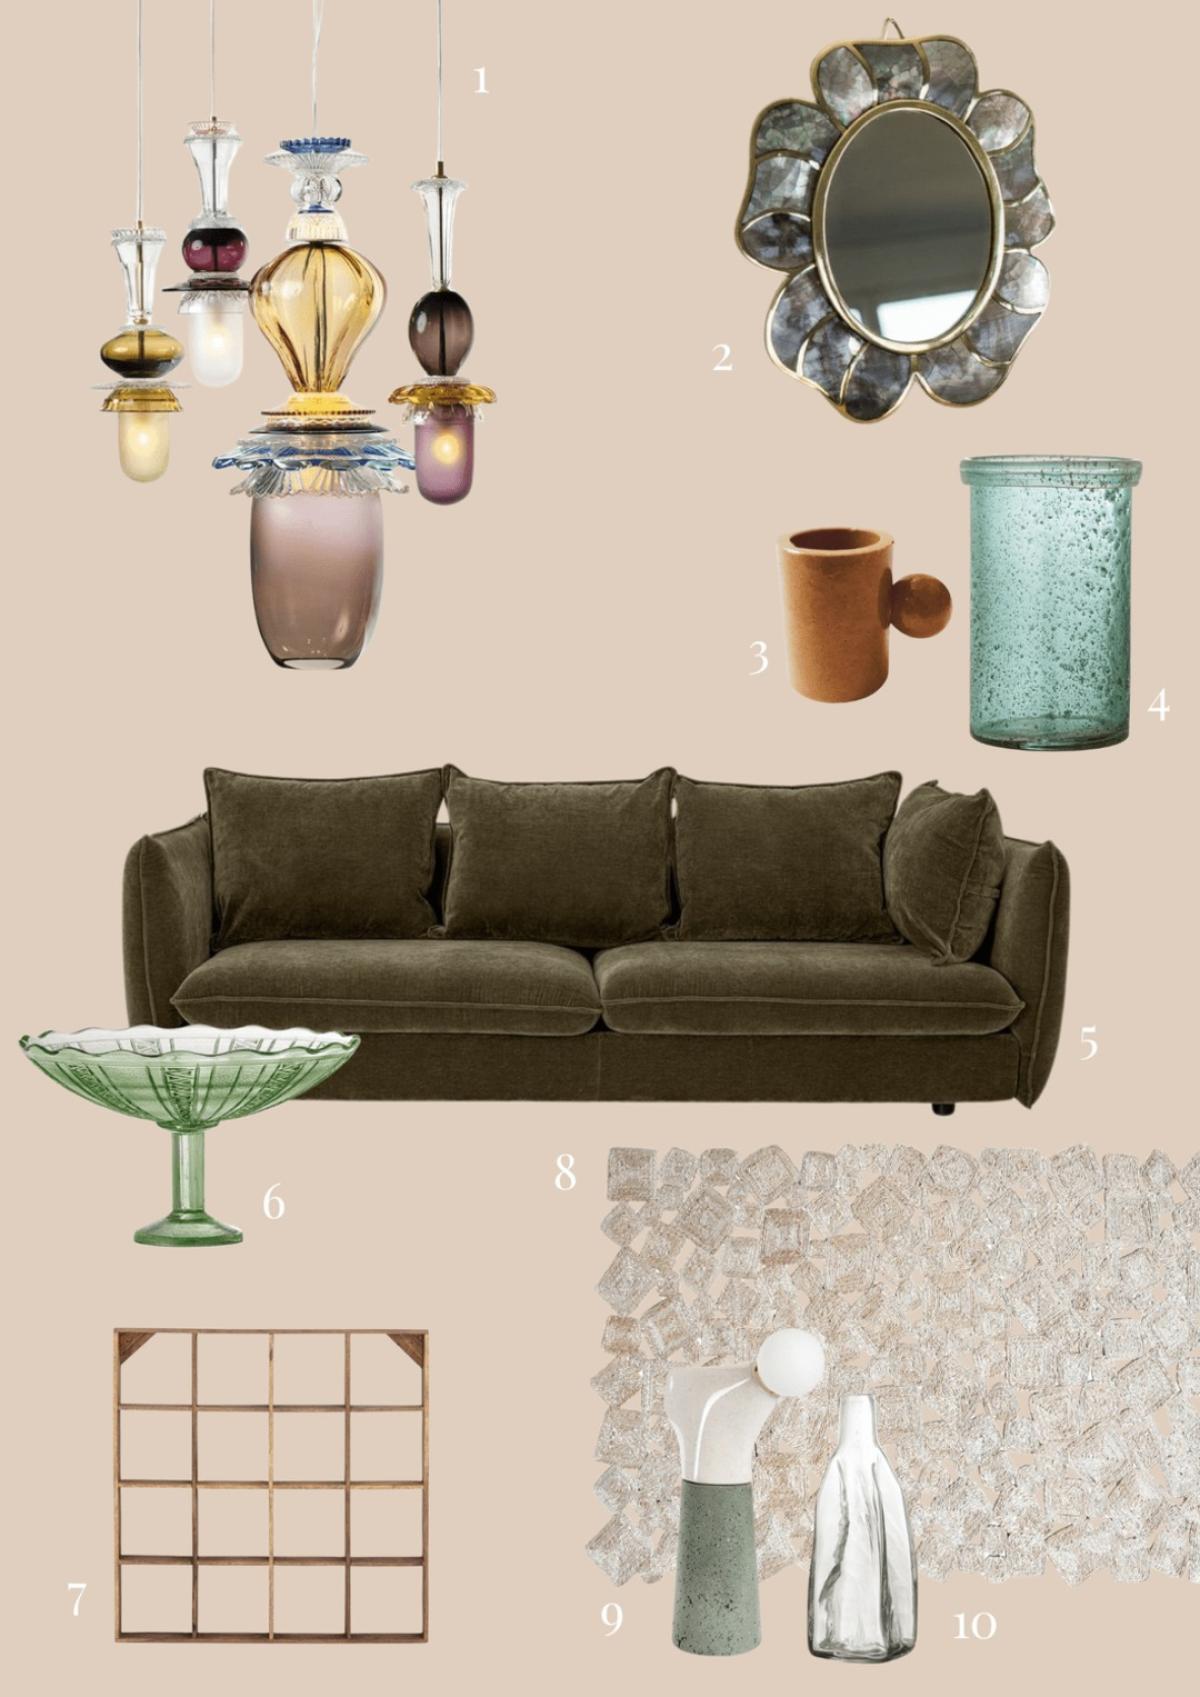 MAISON & OBJET AND MORE 